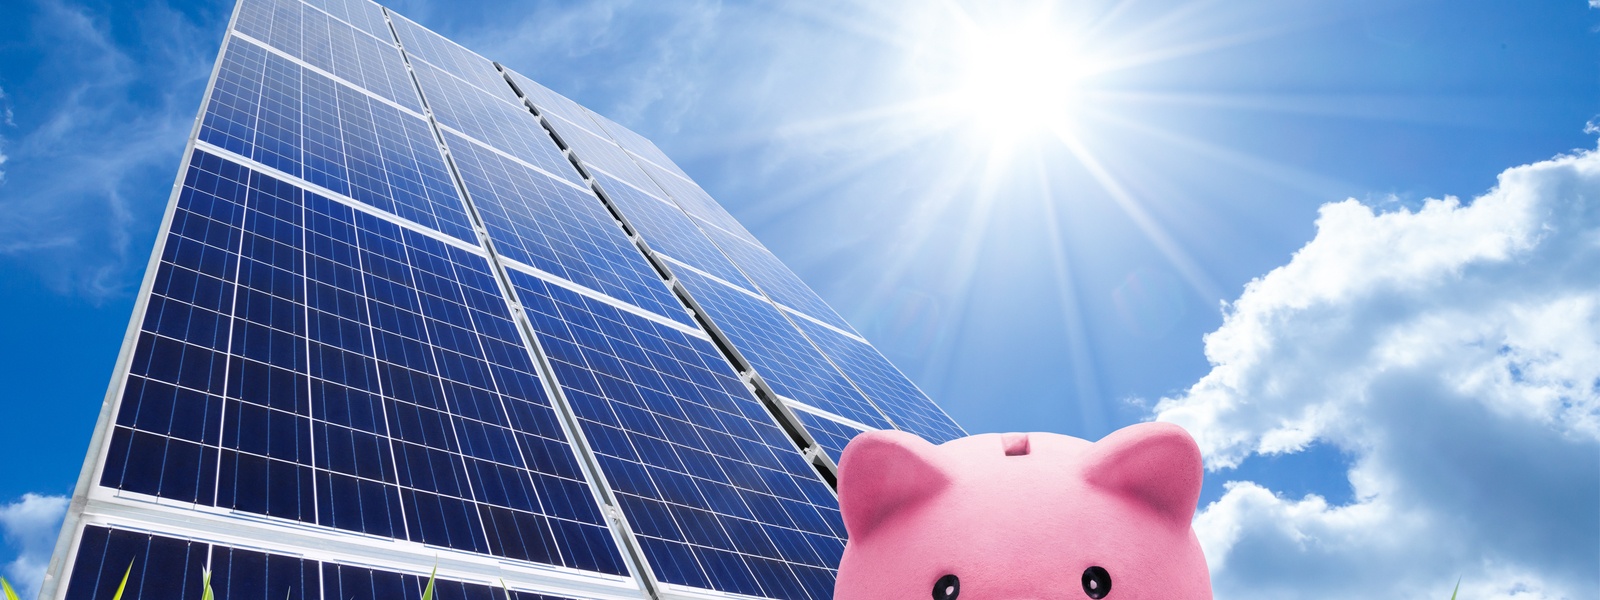 Does switching to solar power really save money in the long run?